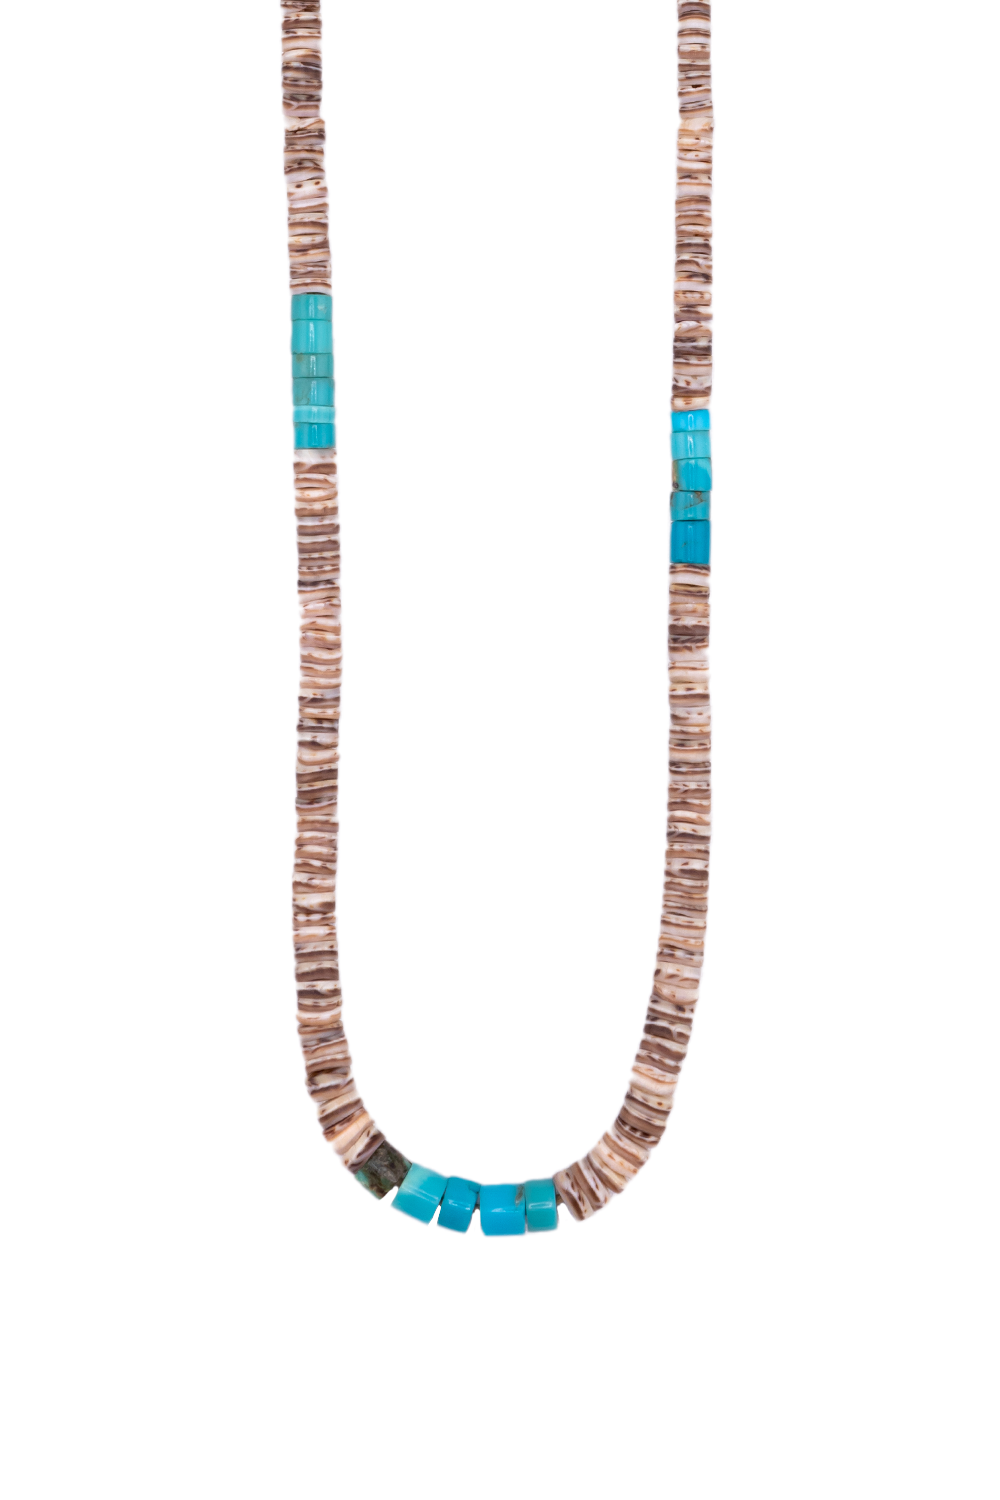 Very Old Pueblo Olive Shell Turquoise Heishi Necklace